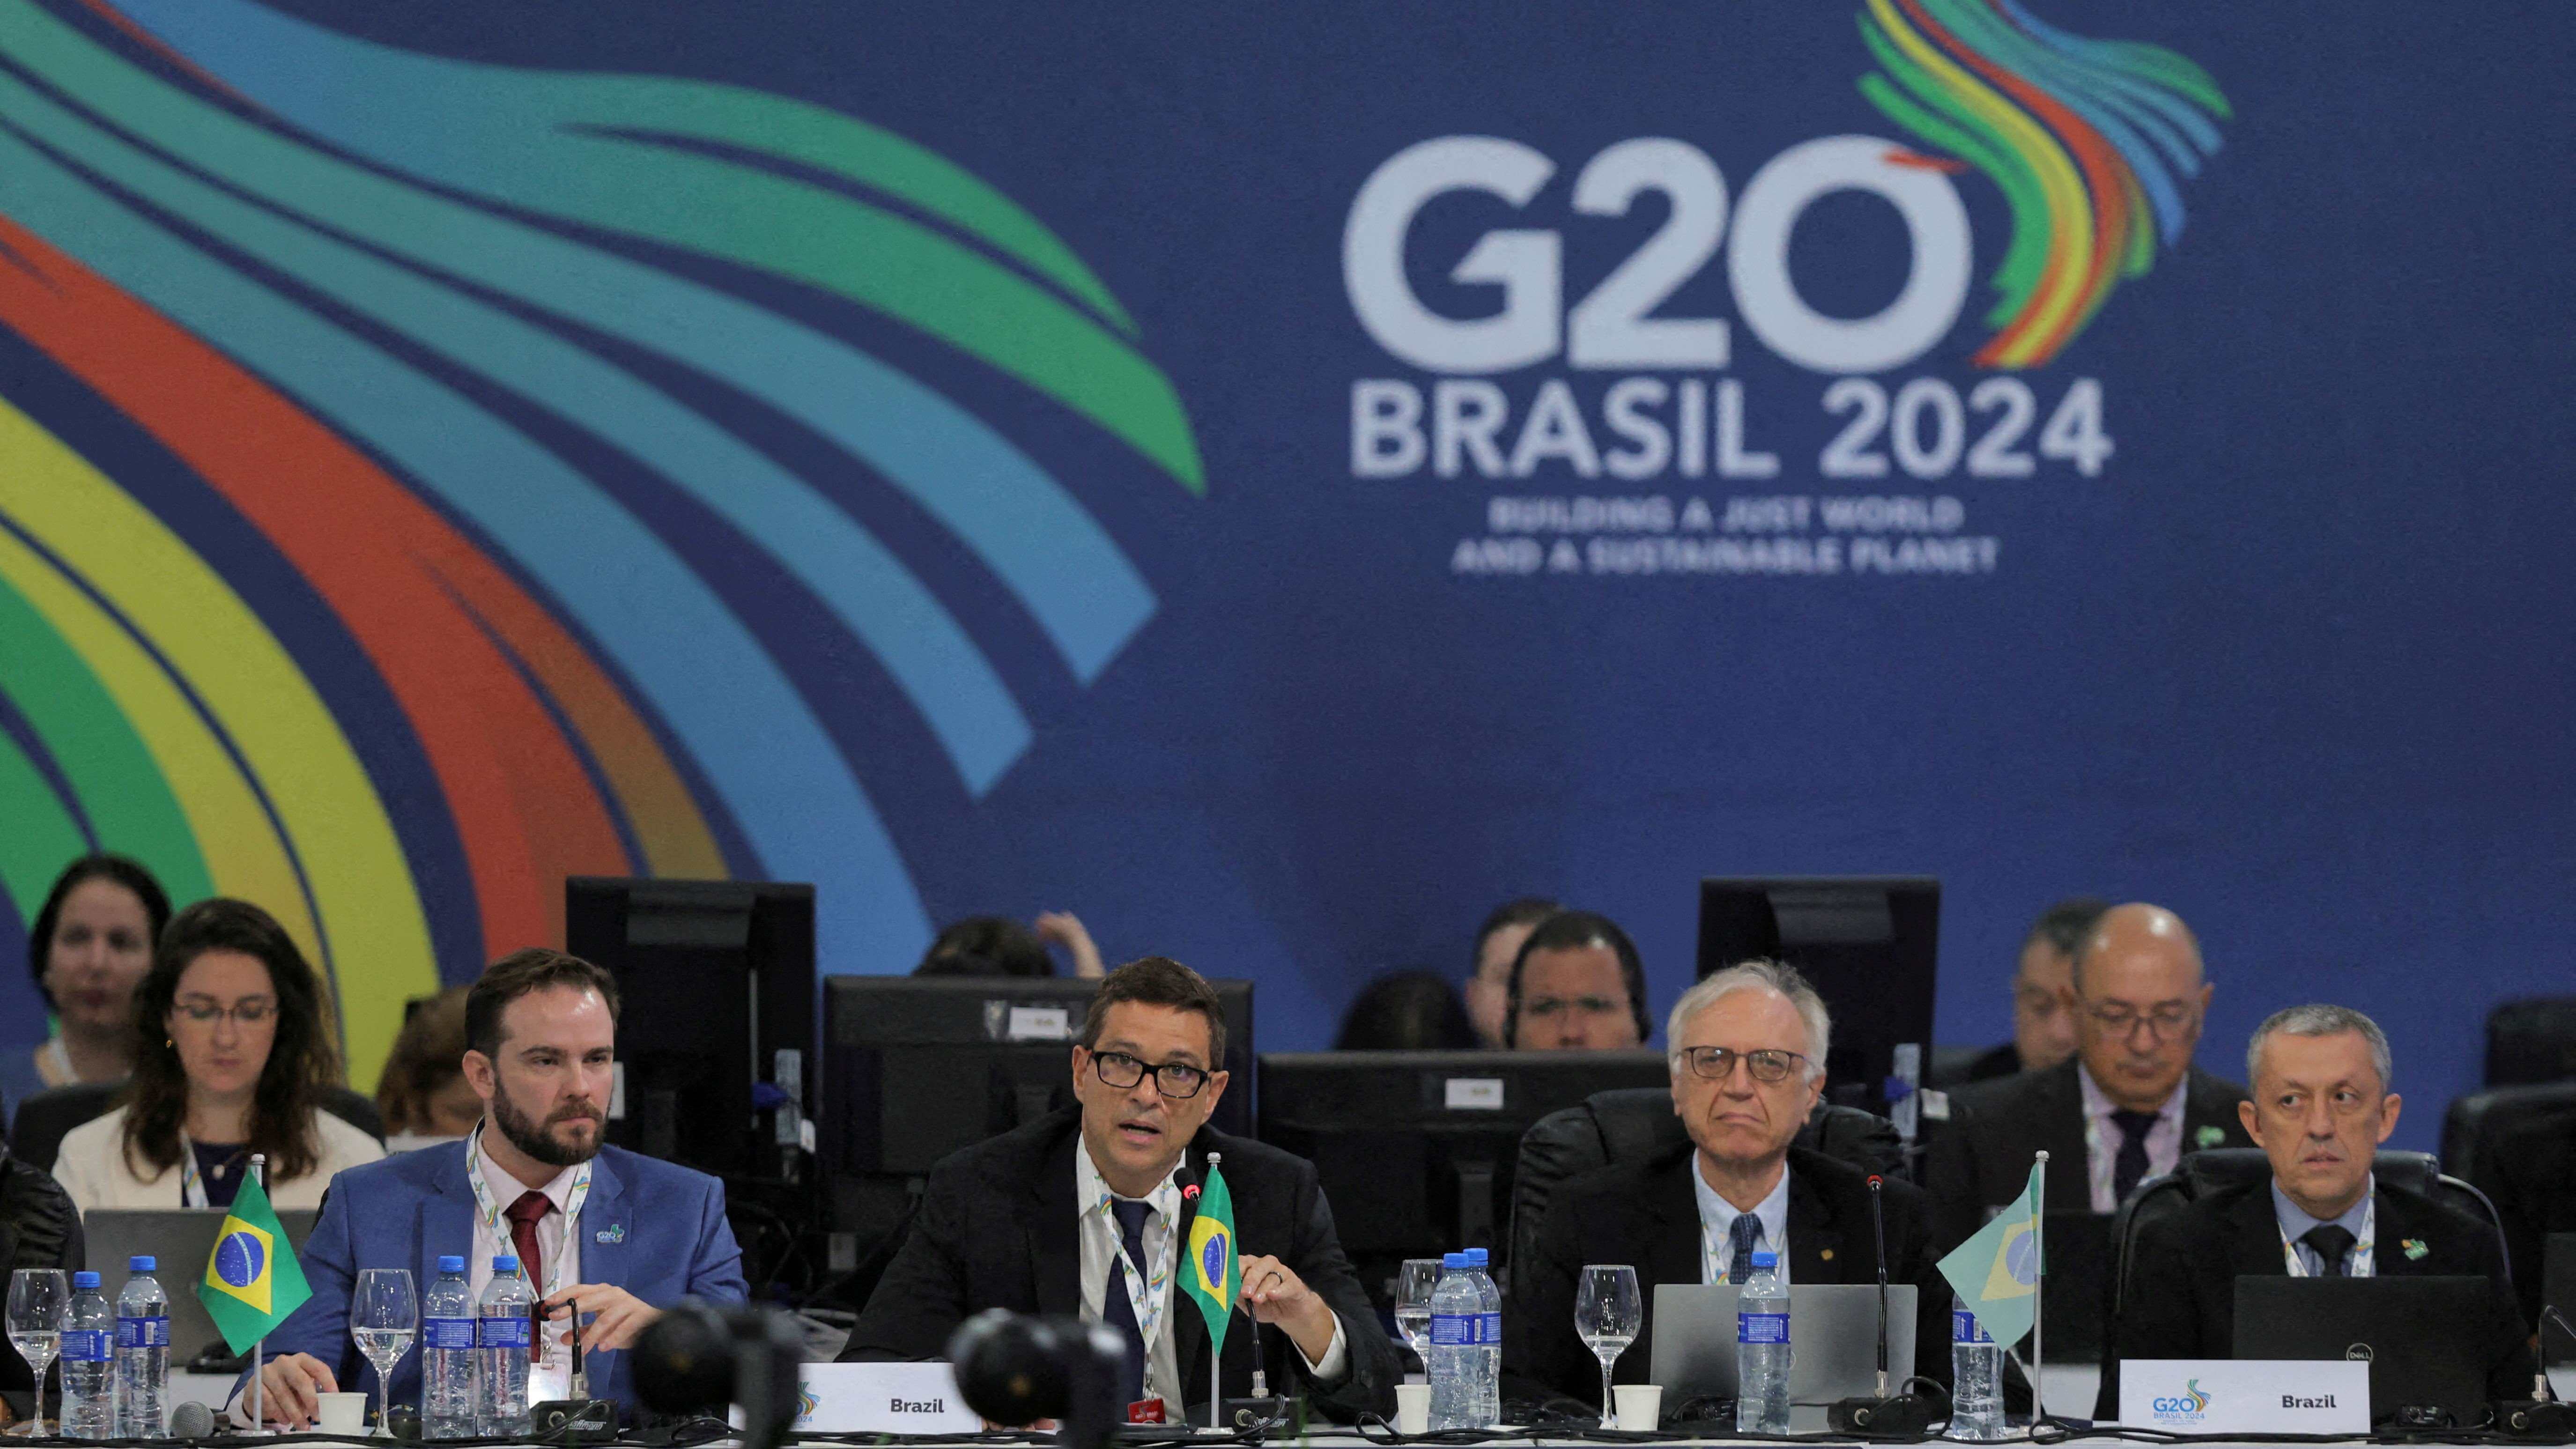 G20 Agree To Work On Brazil's 'Billionaire Tax' Idea, Implementation Seen Difficult